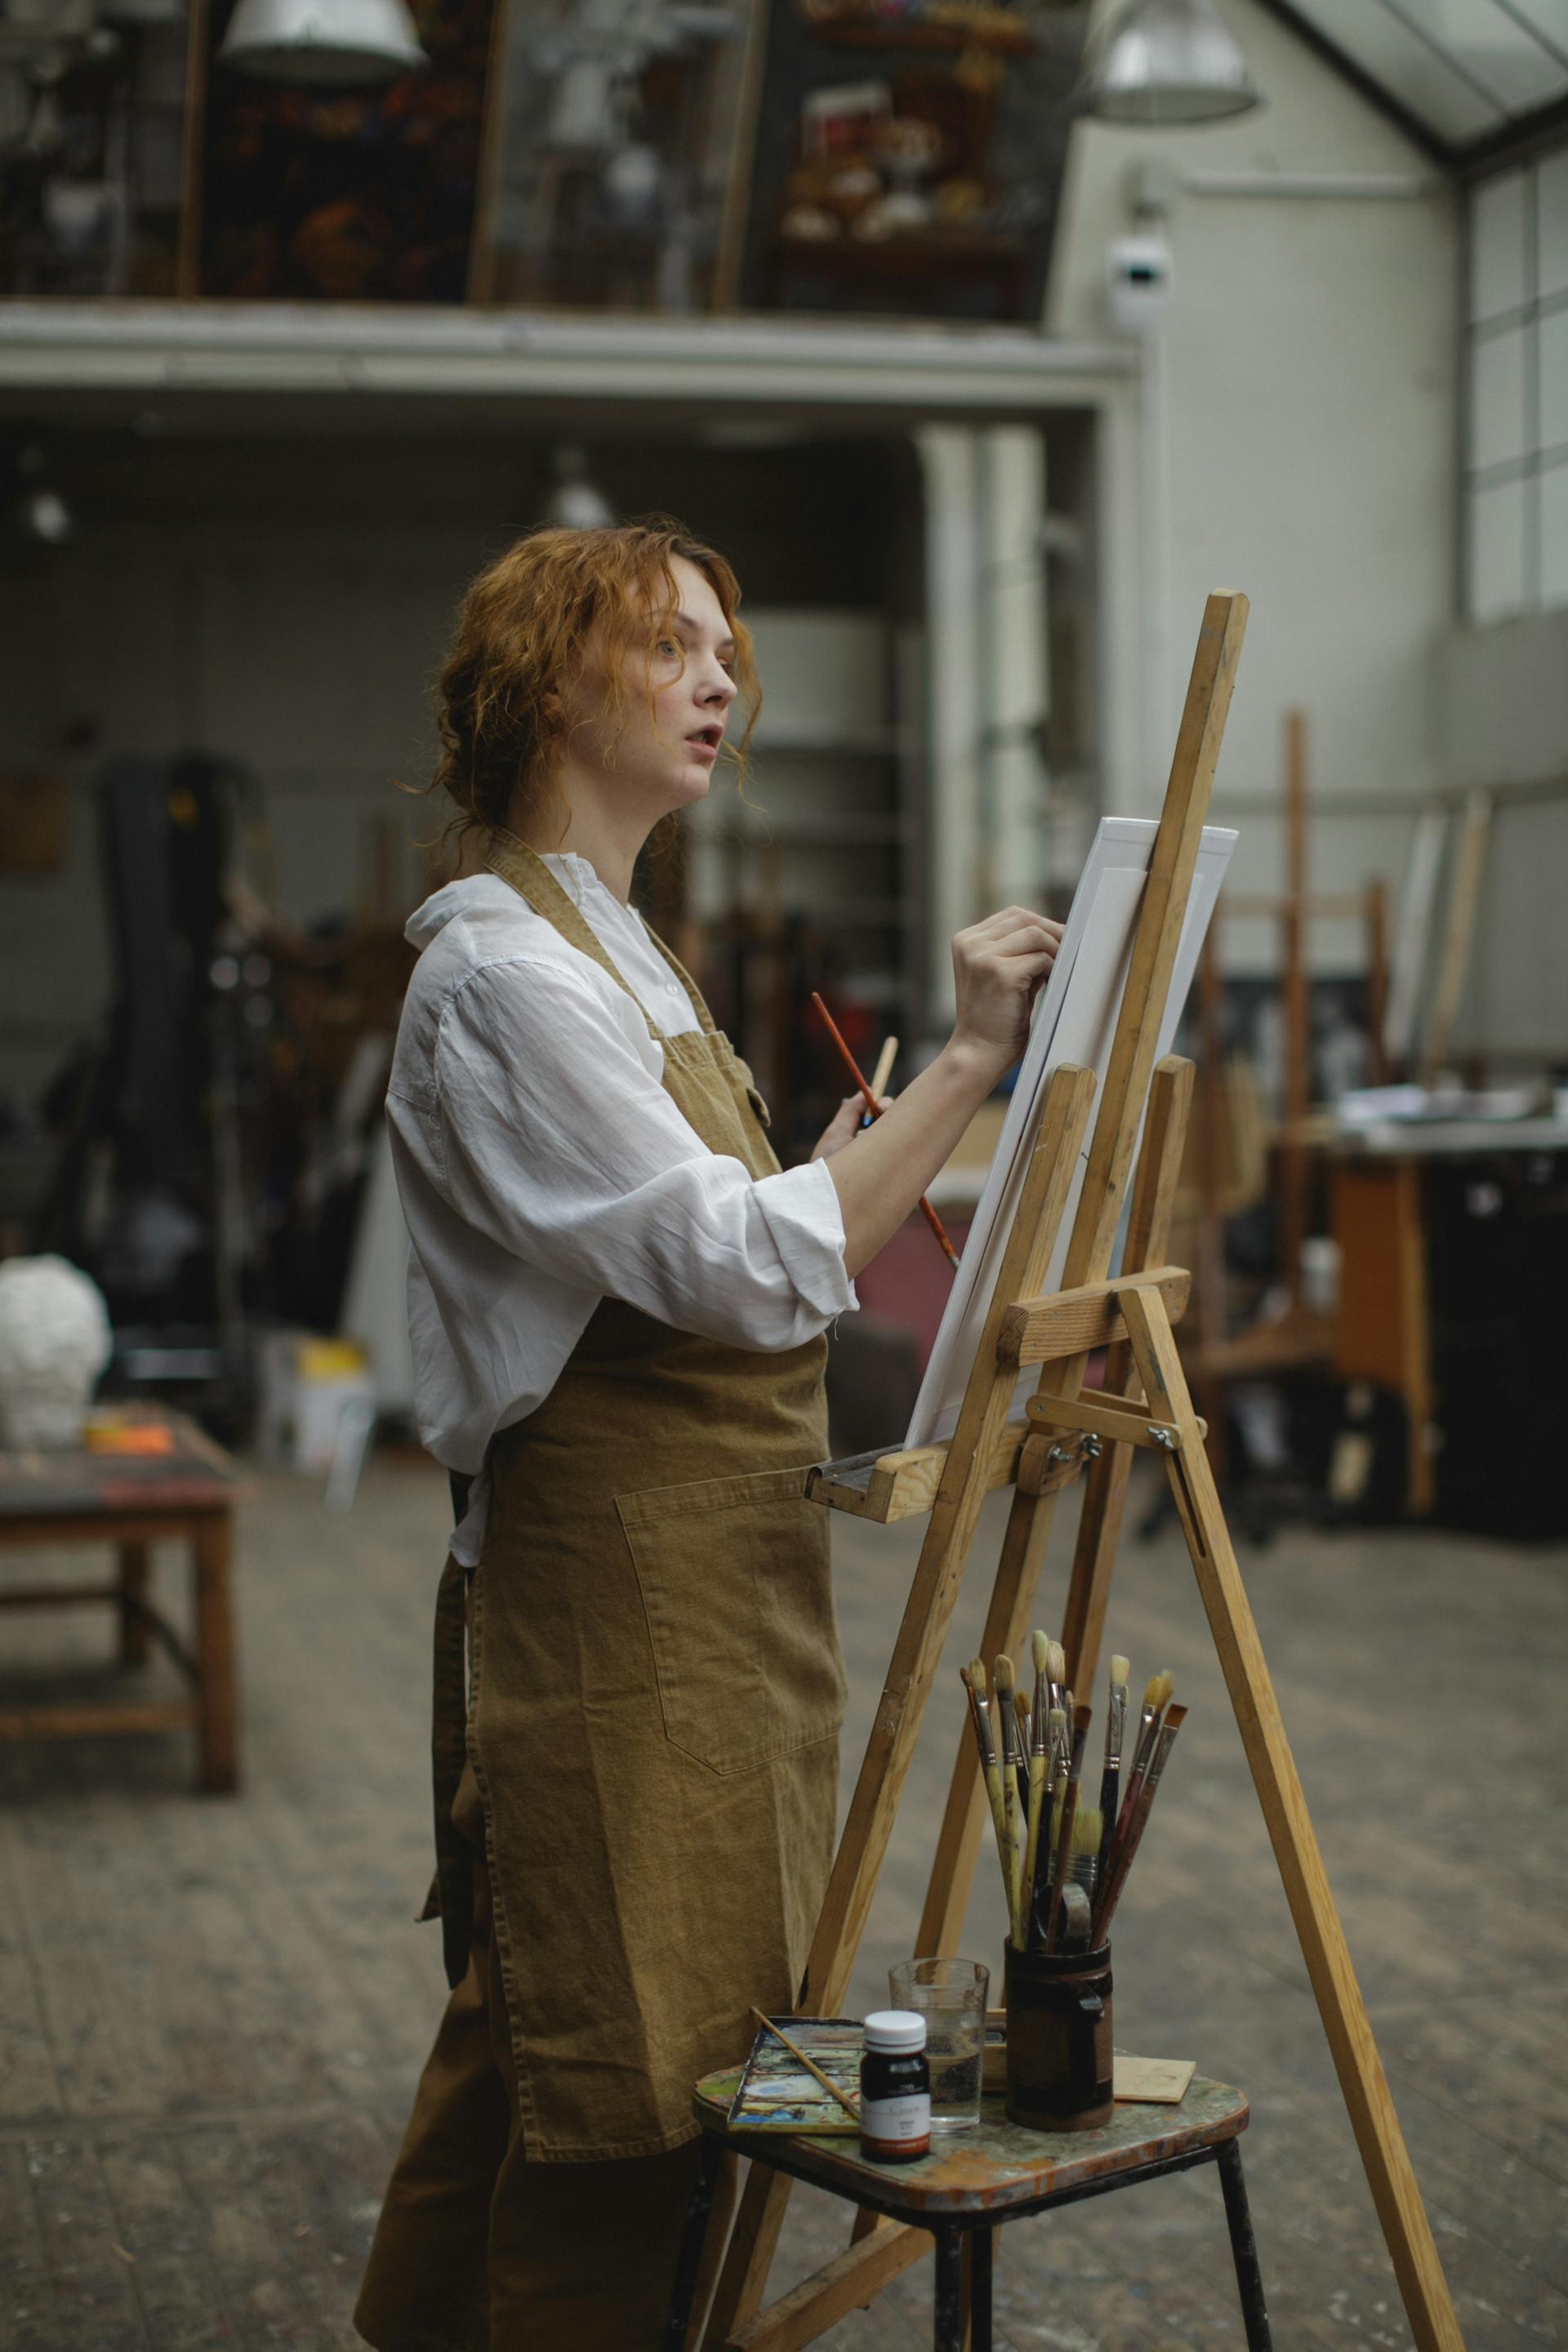 A woman painting on a canvas | Source: Pexels